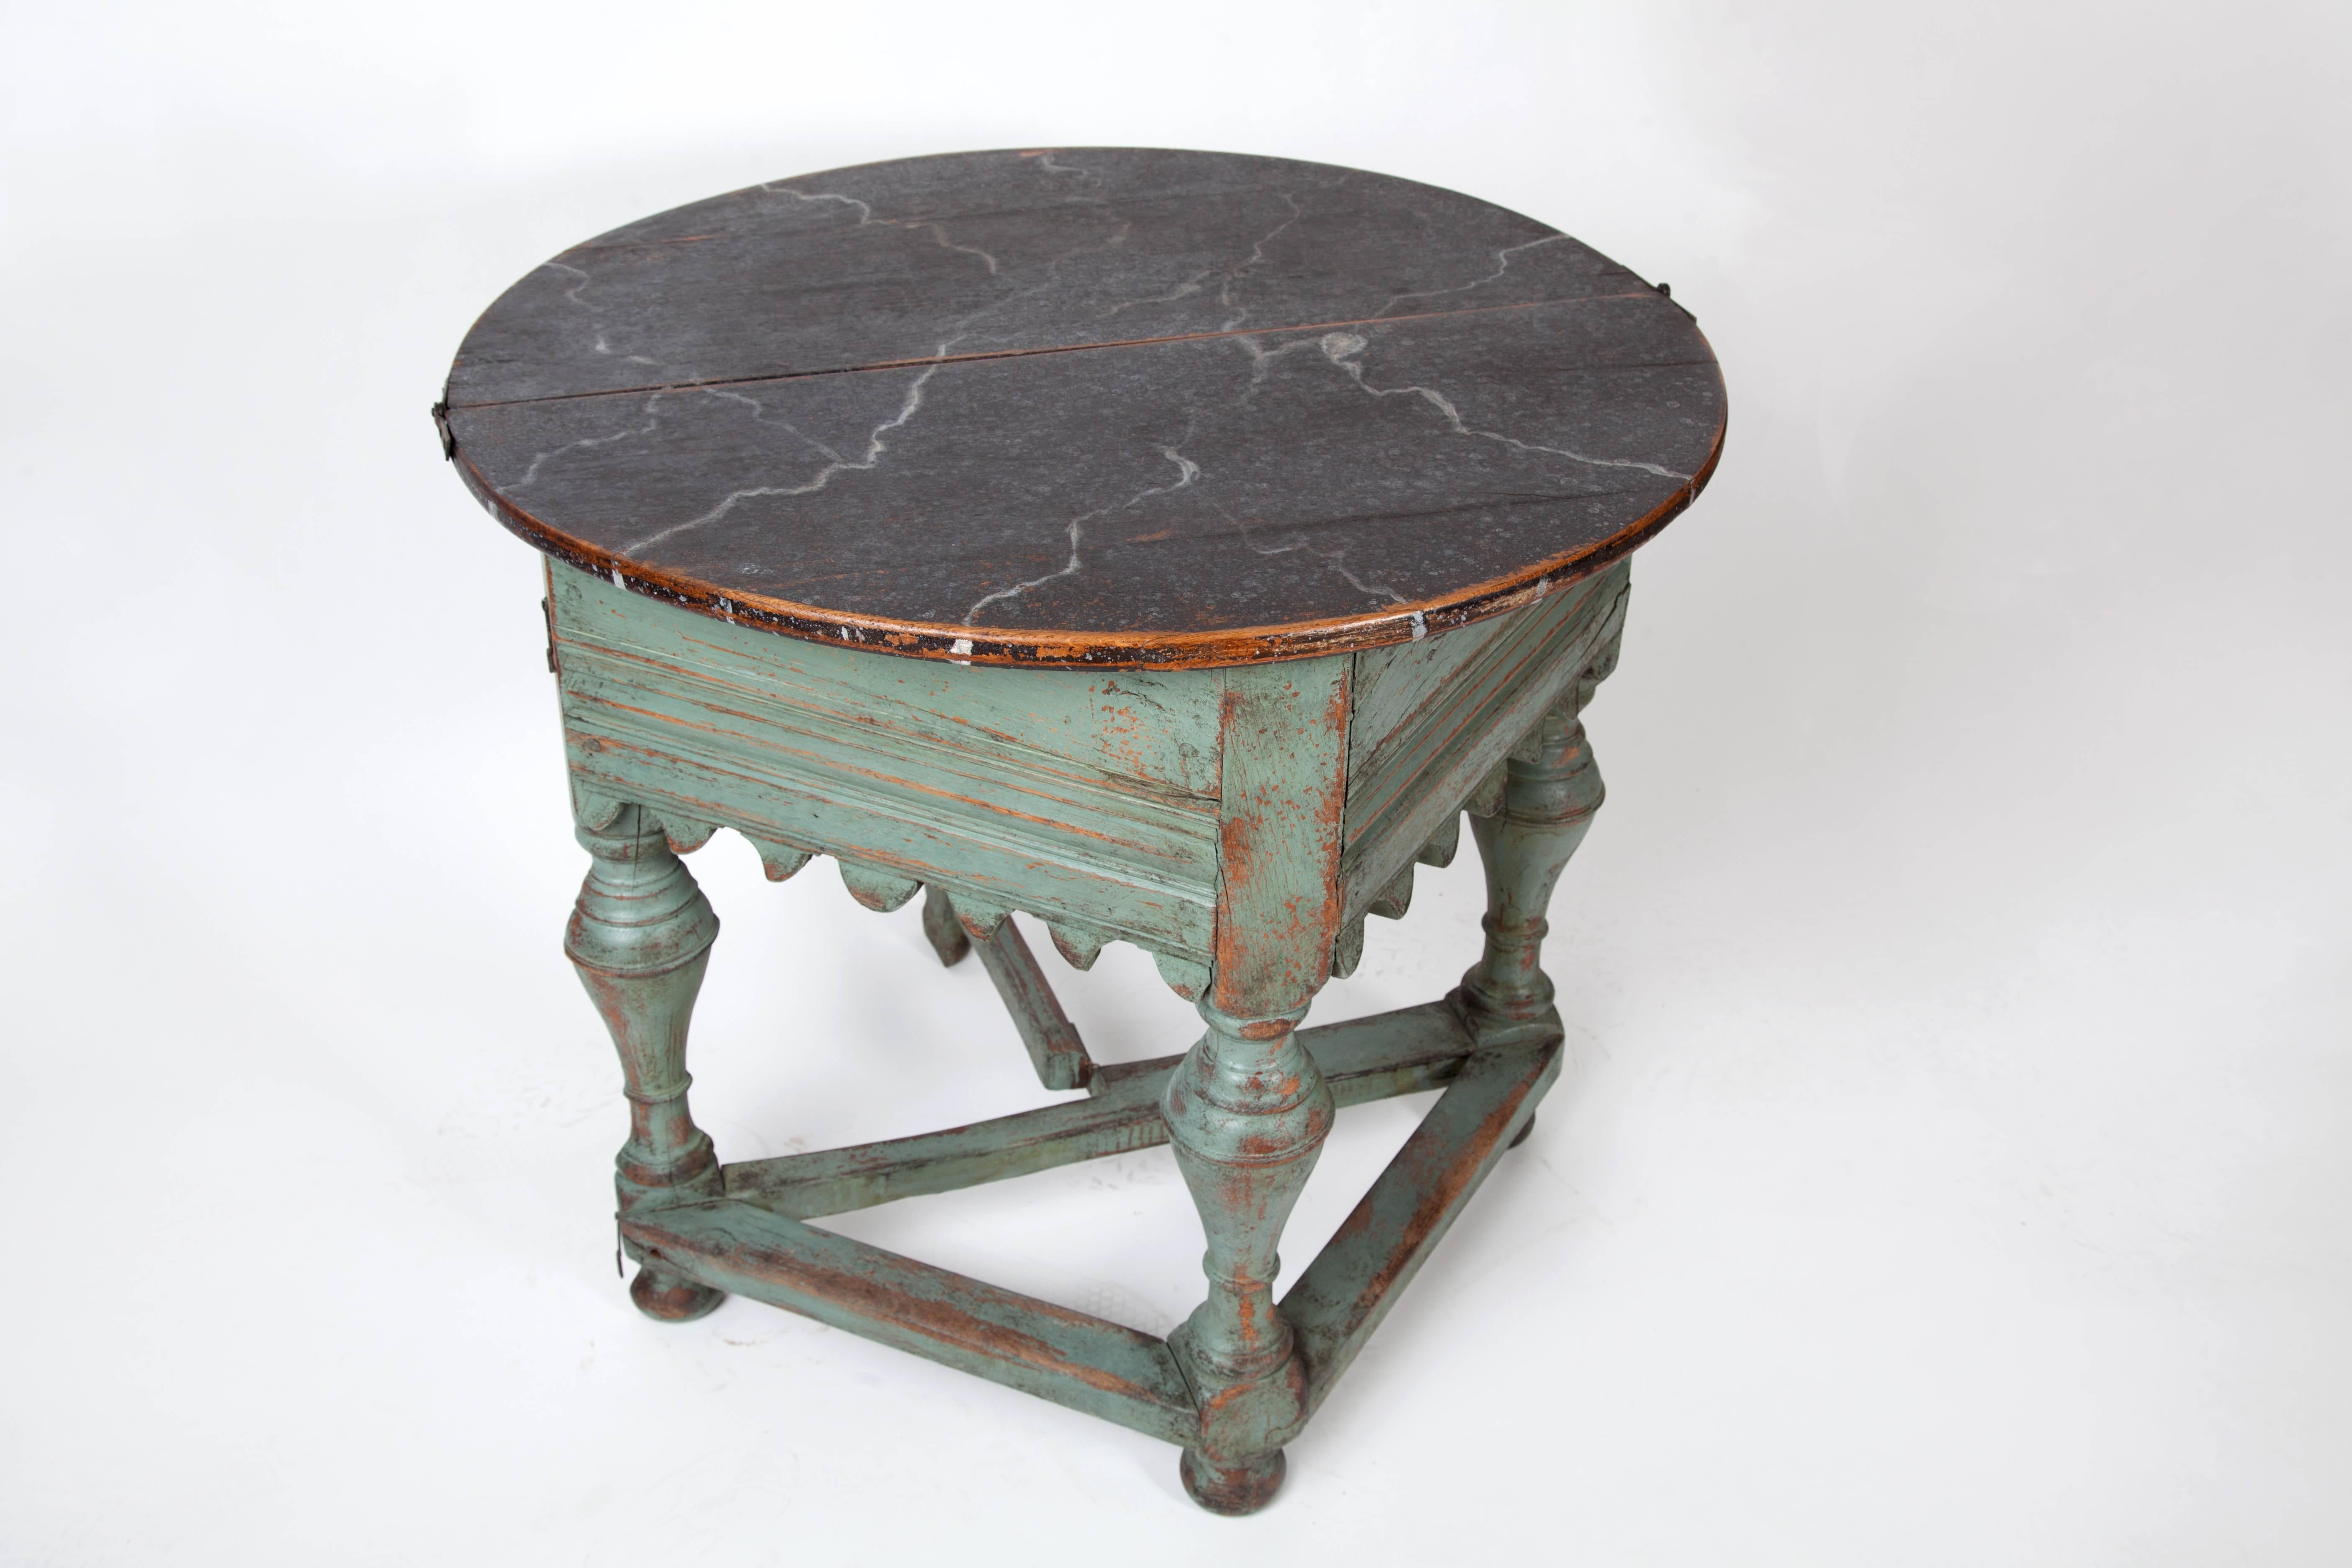 Swedish Baroque folding center table. Painted wood, in excellent condition and great character. The bottom is green; the top is faux marbled black paint. It folds into a beautiful demilune. Measures: 30.5